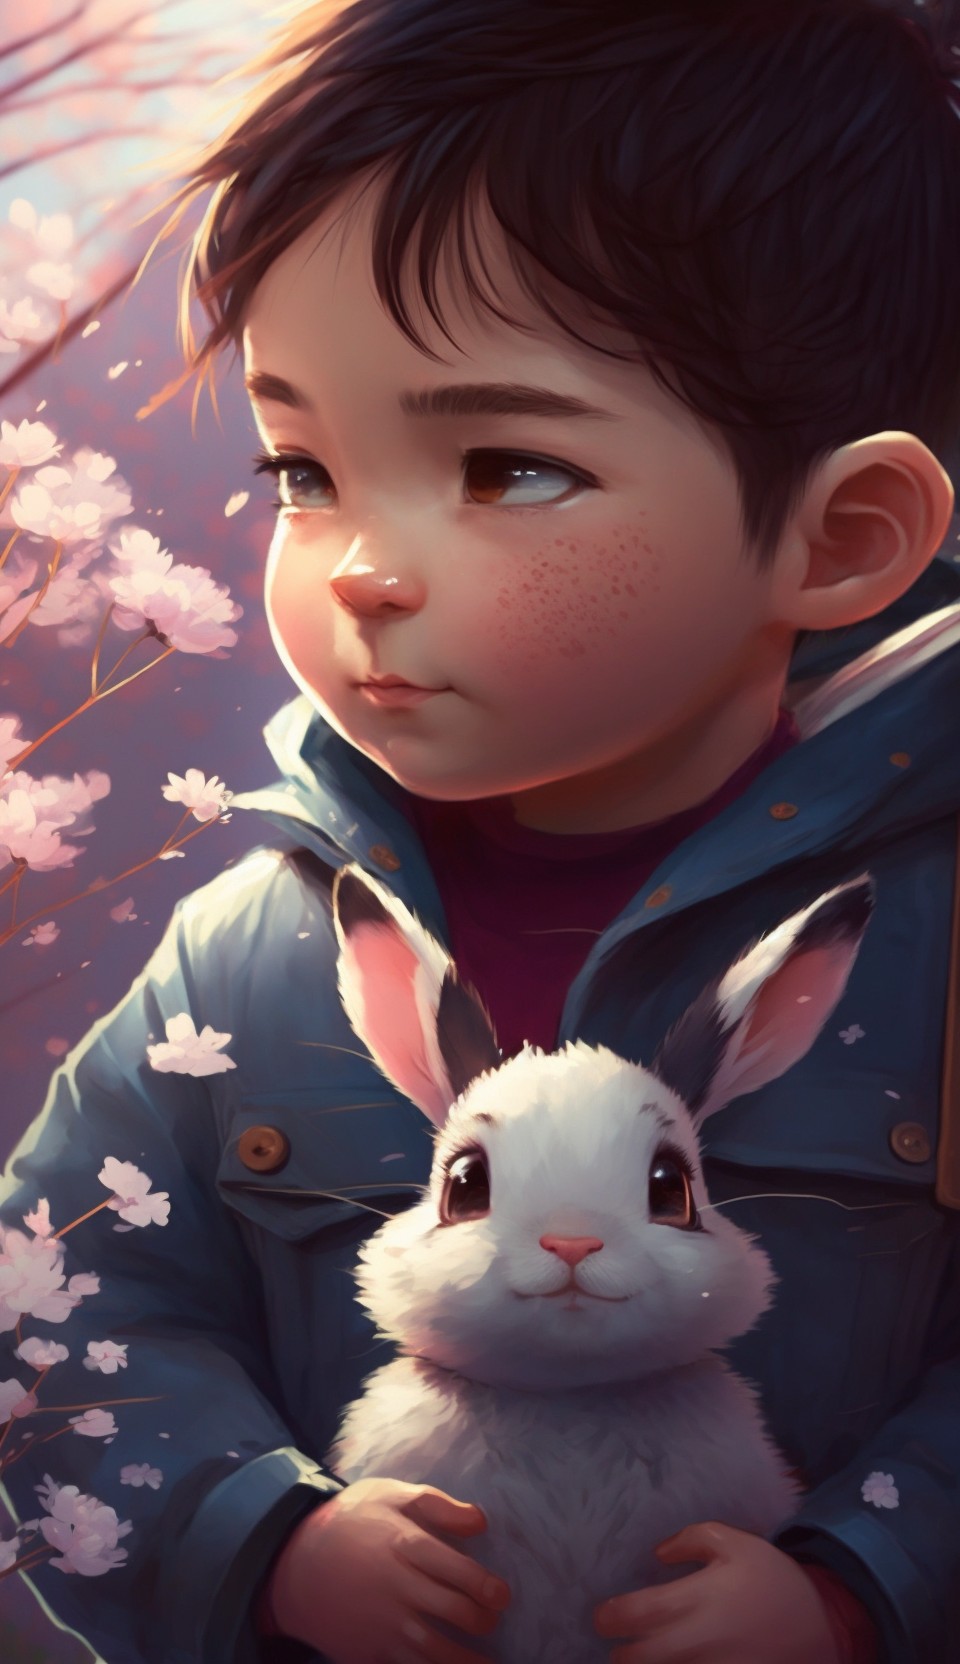 Little Rabbit and Little Boy Growing Together